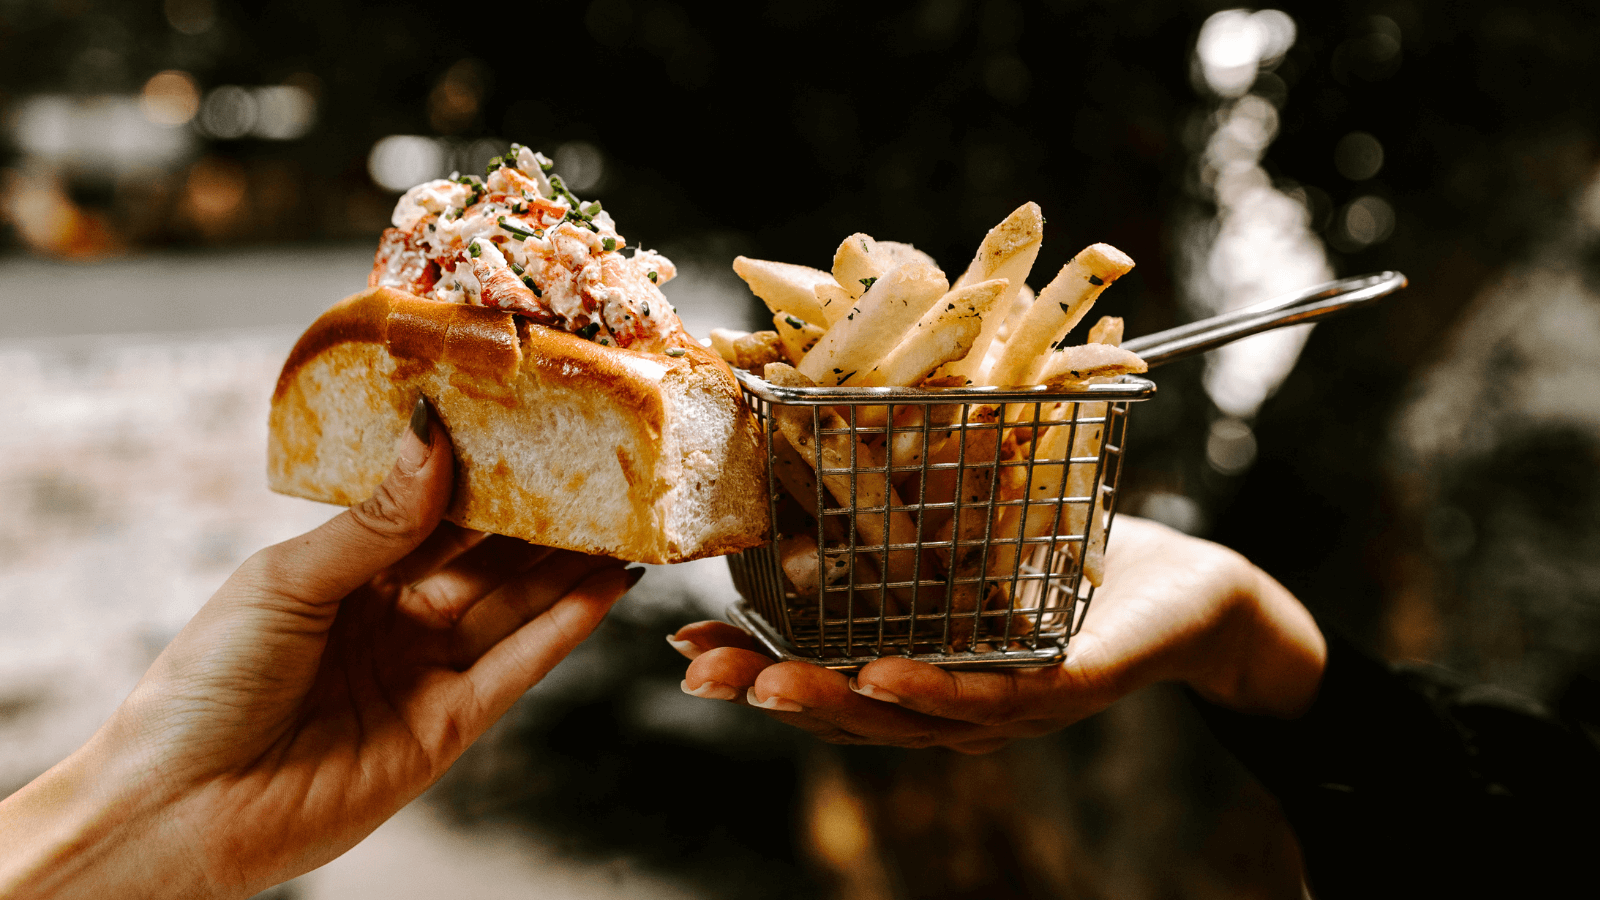 Lobster Roll and French Fries